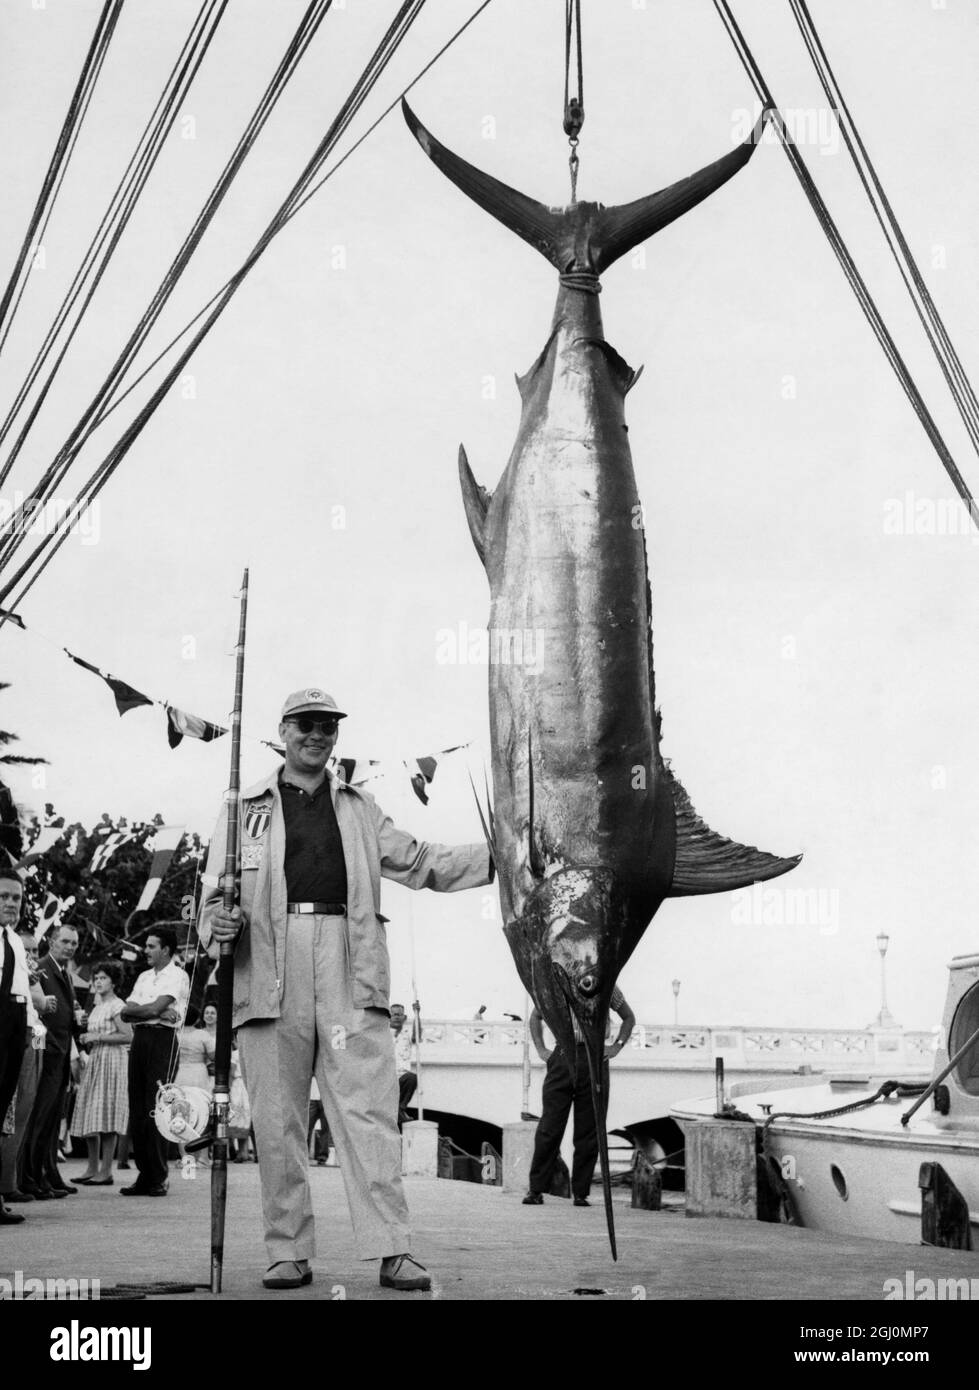 William G. Carrington Jr. of New York City, stands proudly alongside the Giant Blue Marlin he landed in the waters off San Juan, Puerto Rico. He used a 39-pound test line to hook the 435 pound fish. Carrington was a member of the Club Nautico team of San Juan and taking part in a fishing journey against a North Carolina team to determine which of the areas is the world's Blue Marlin centre - 24 August 1959 ©TopFoto Stock Photo